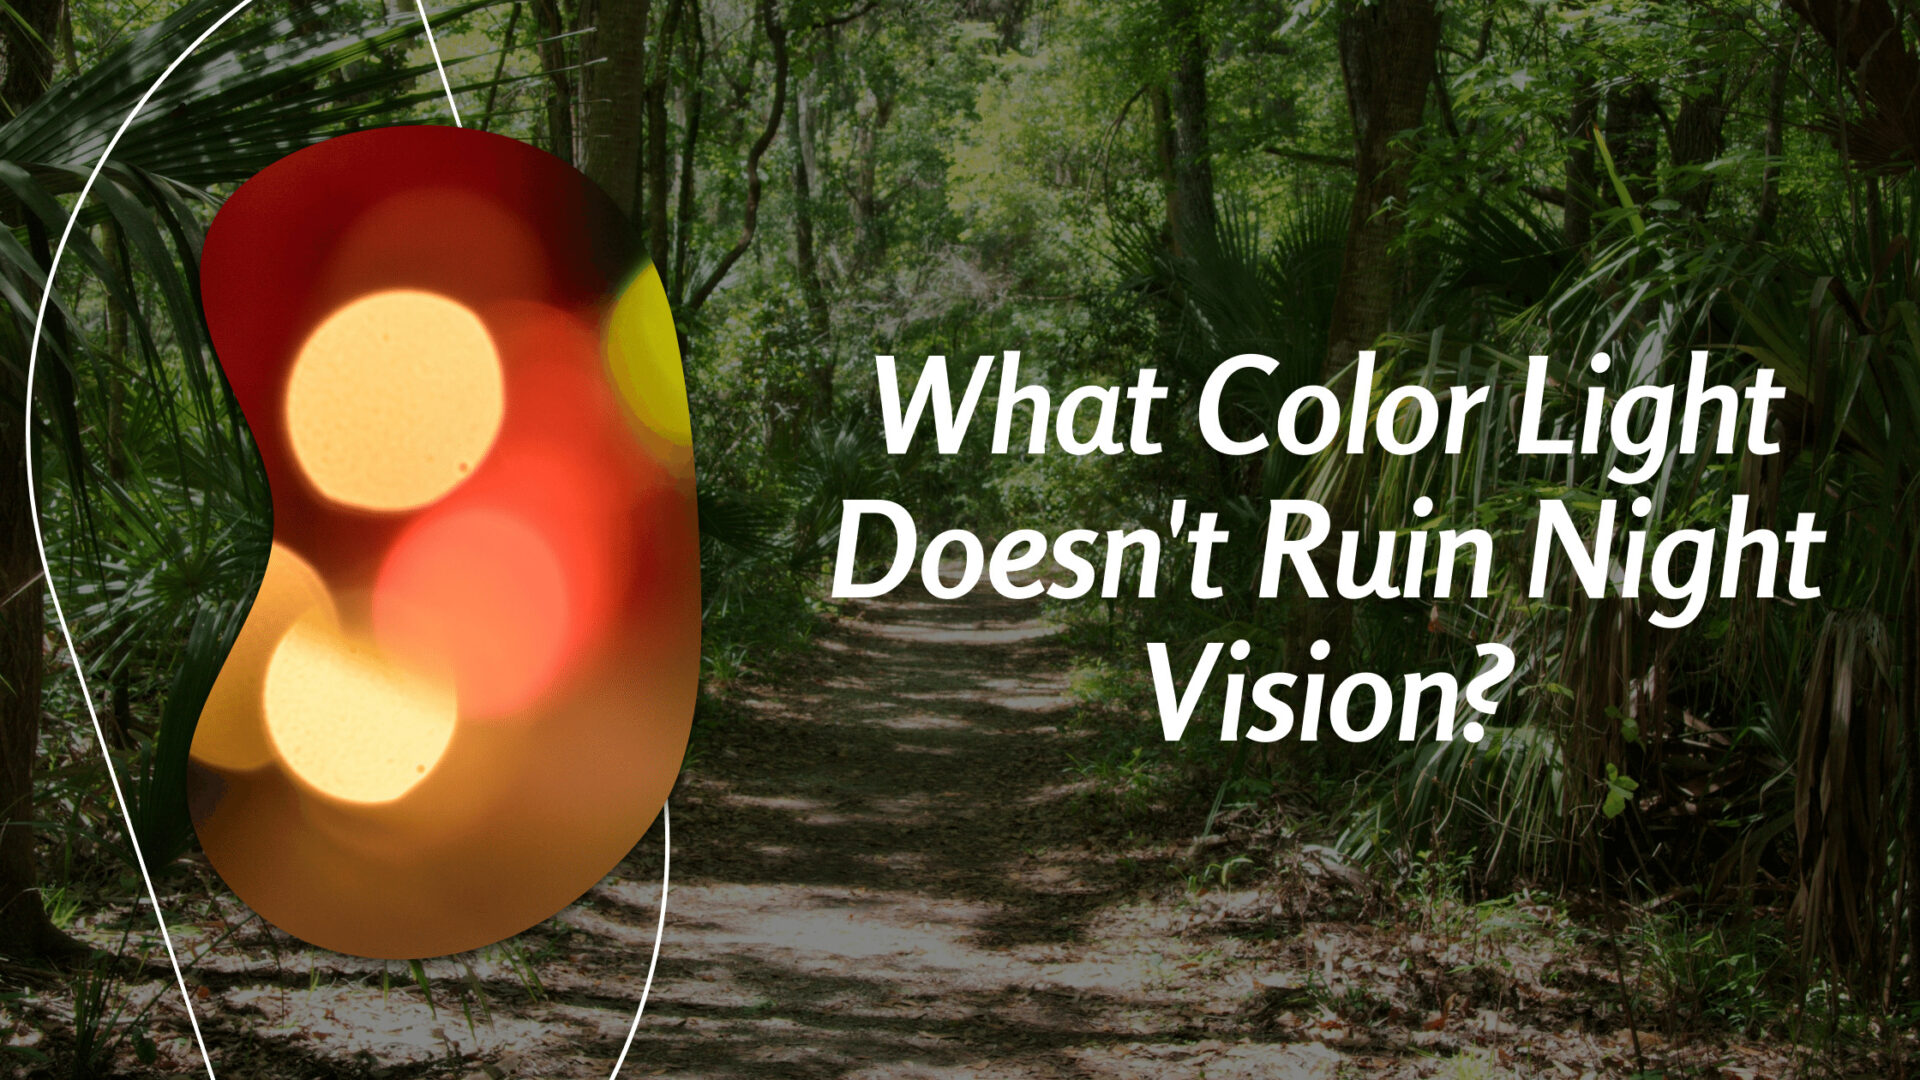 What Color Light Doesn't Ruin Night Vision?